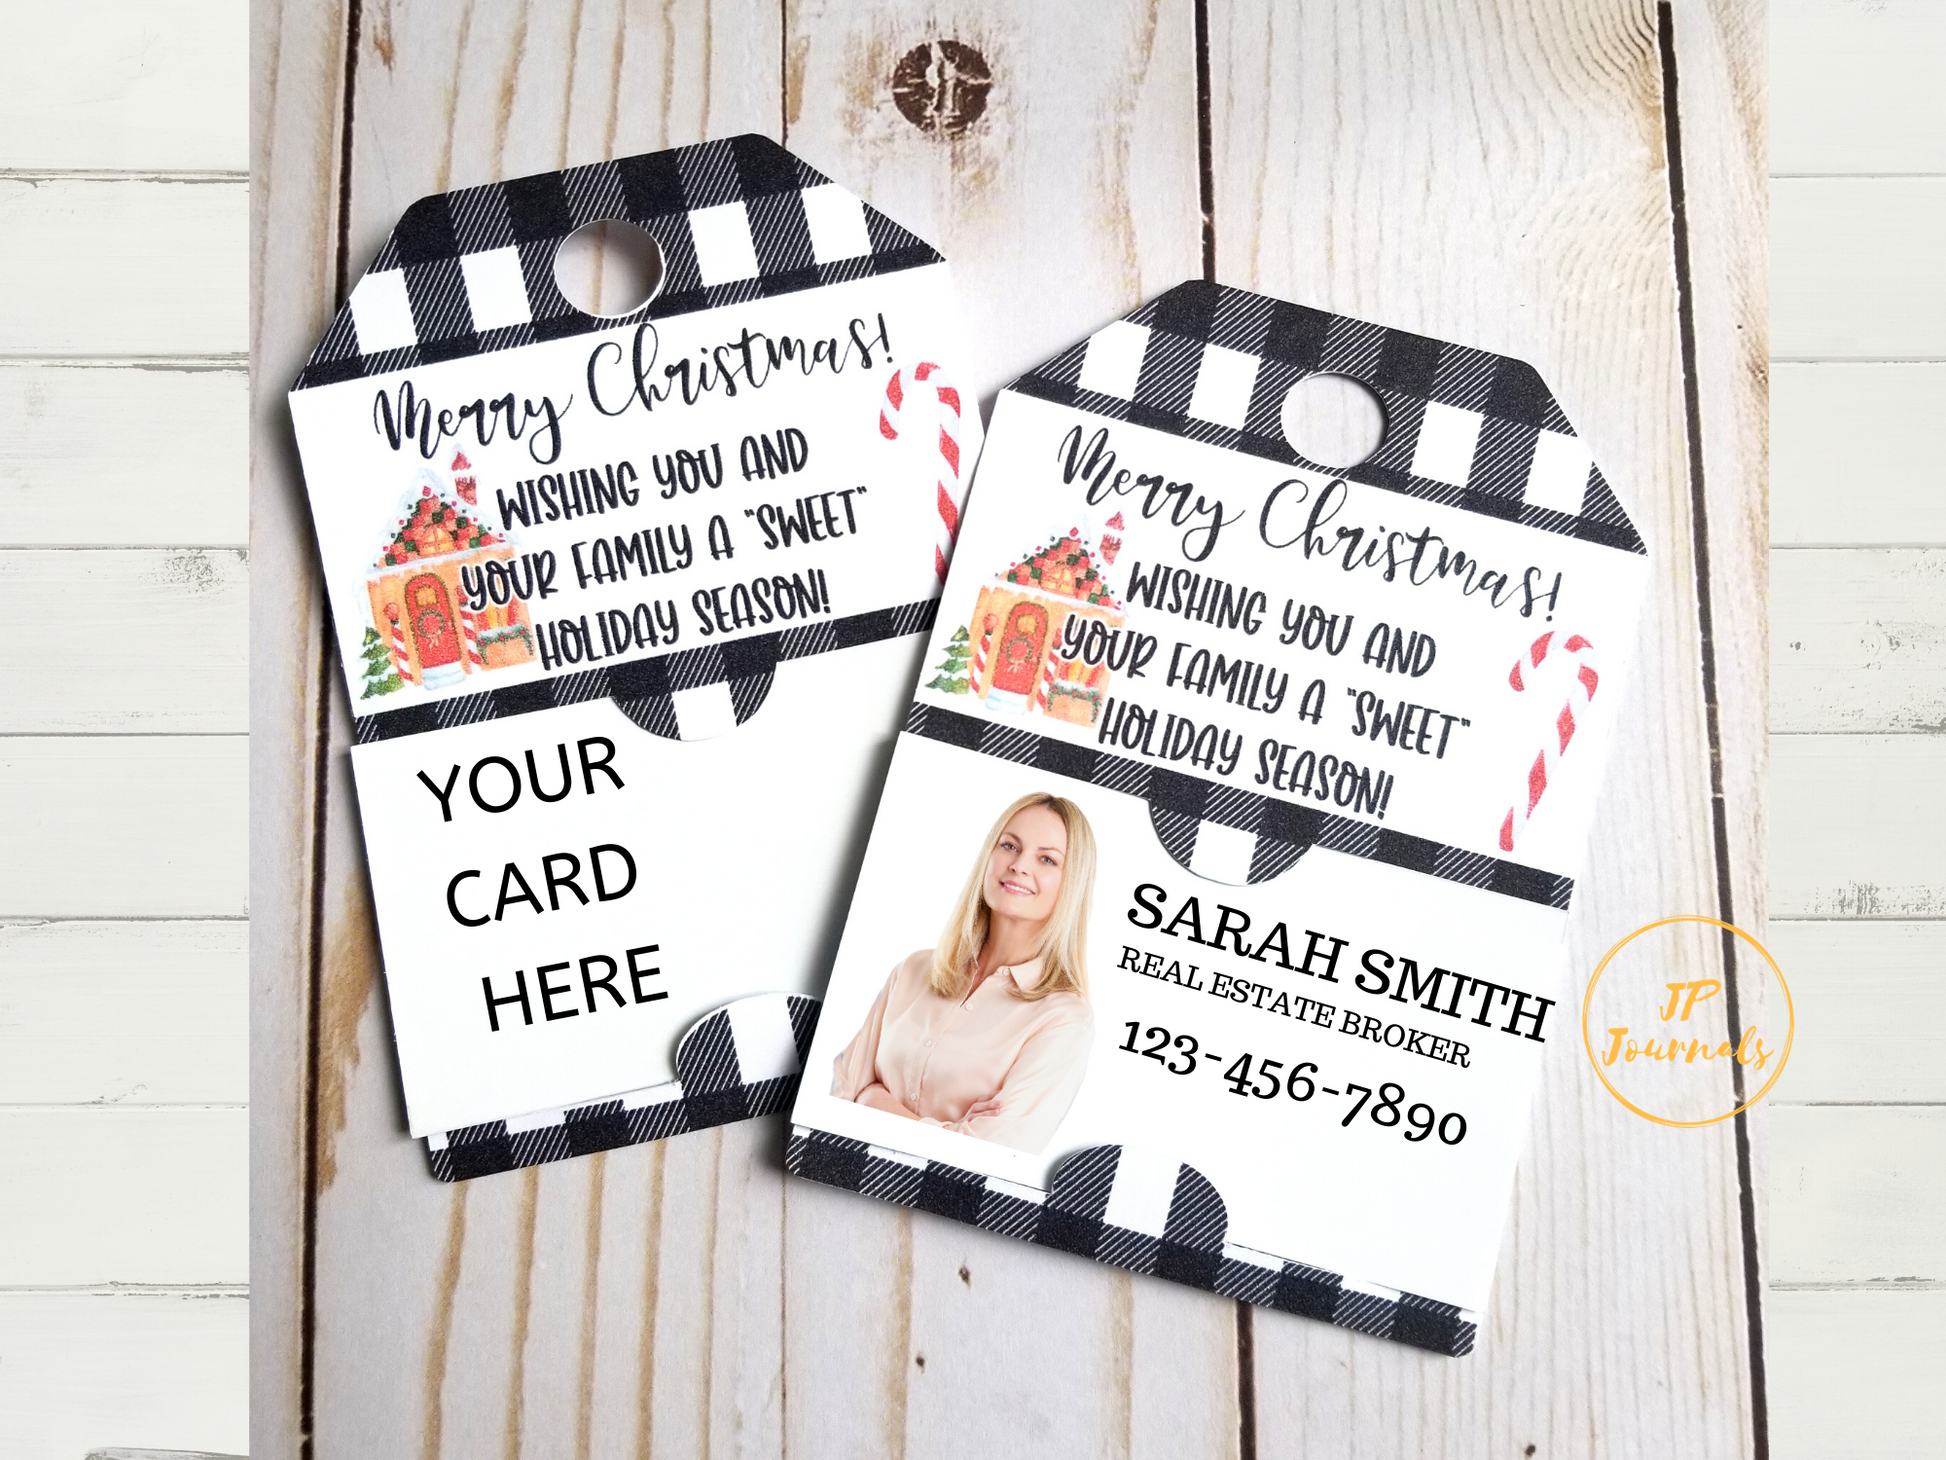 Business Marketing Hang Tags, Business Card Holder Christmas Tags for Marketing and Client Gifts, Real Estate Agent Broker Sales